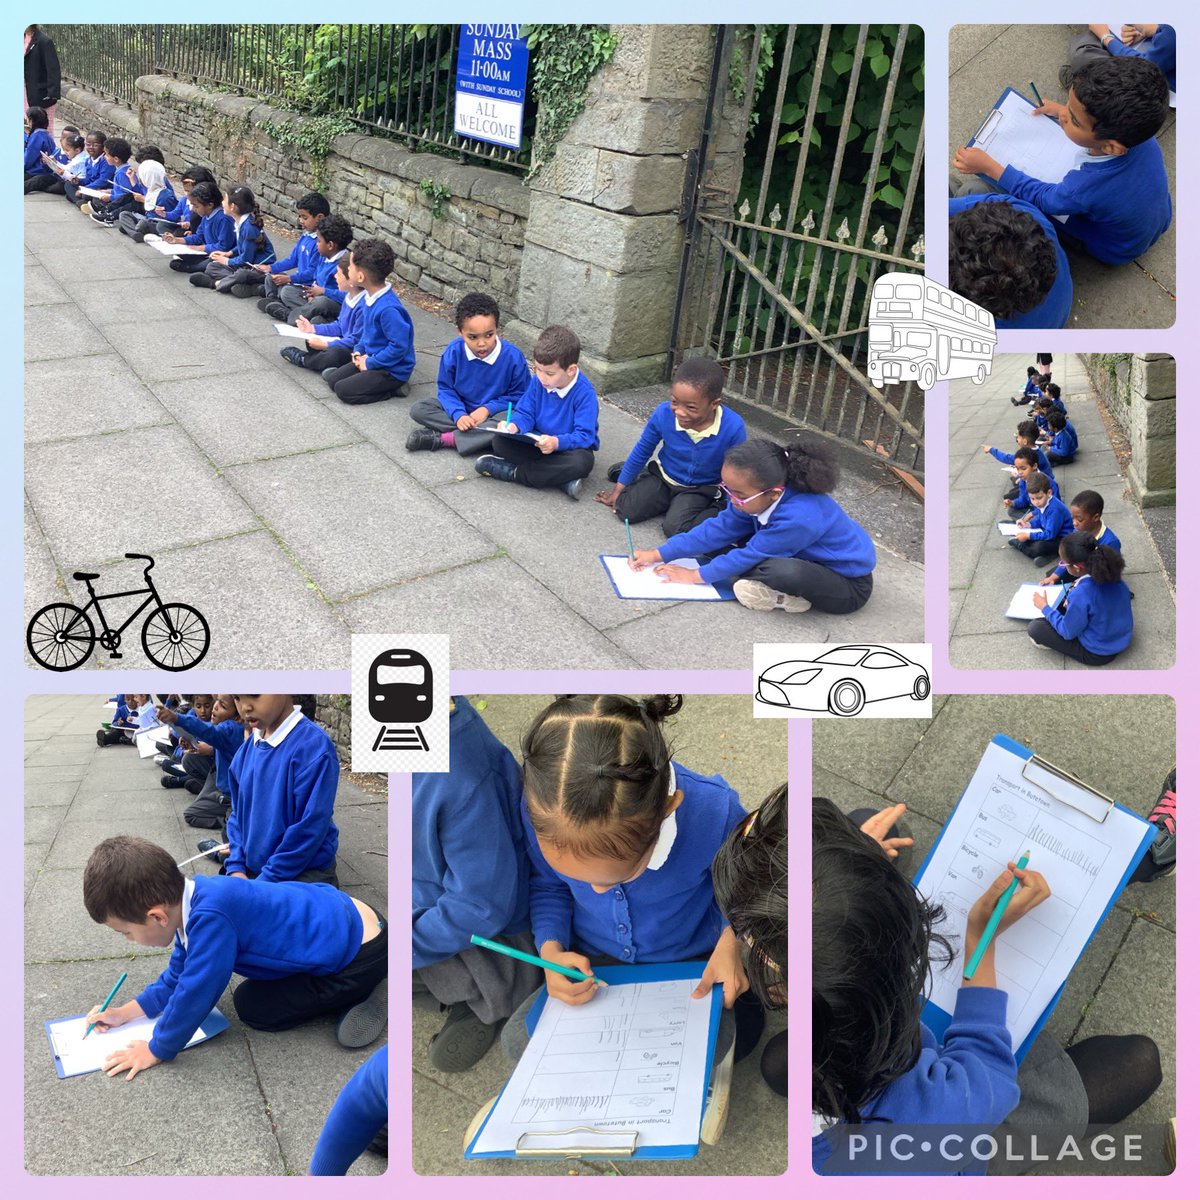 Today in Reception we have been carrying out a transport survey in our local community. We saw so many different modes of transport! 🚲🚕🚂🛴With the data we have collected, we are making bar graphs to find out which type of transport was most popular! 🚚🚙🛵